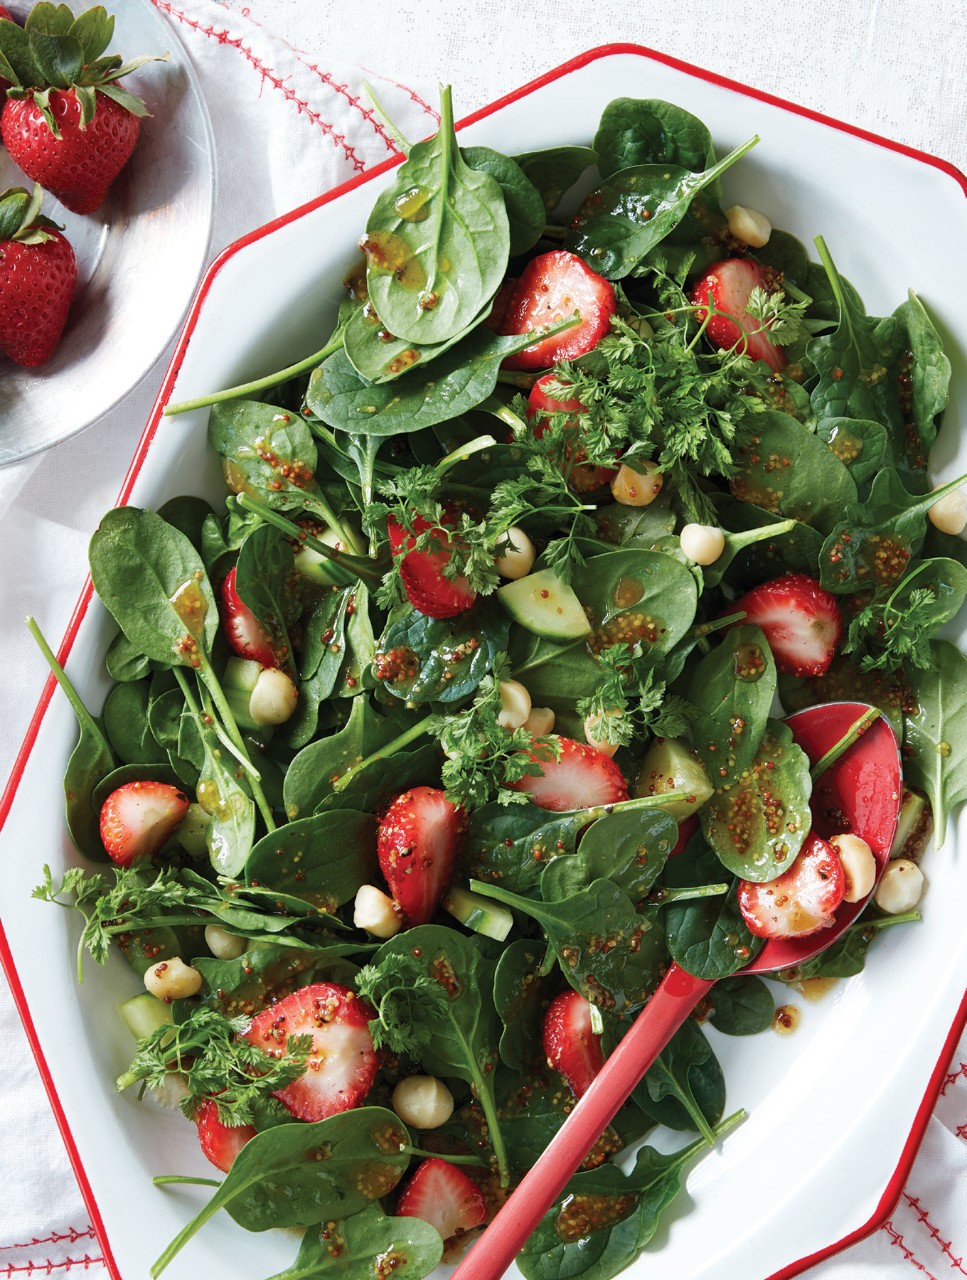 Strawberry Macadamia Nut and Spinach Salad with Honey Mustard Vinaigrette